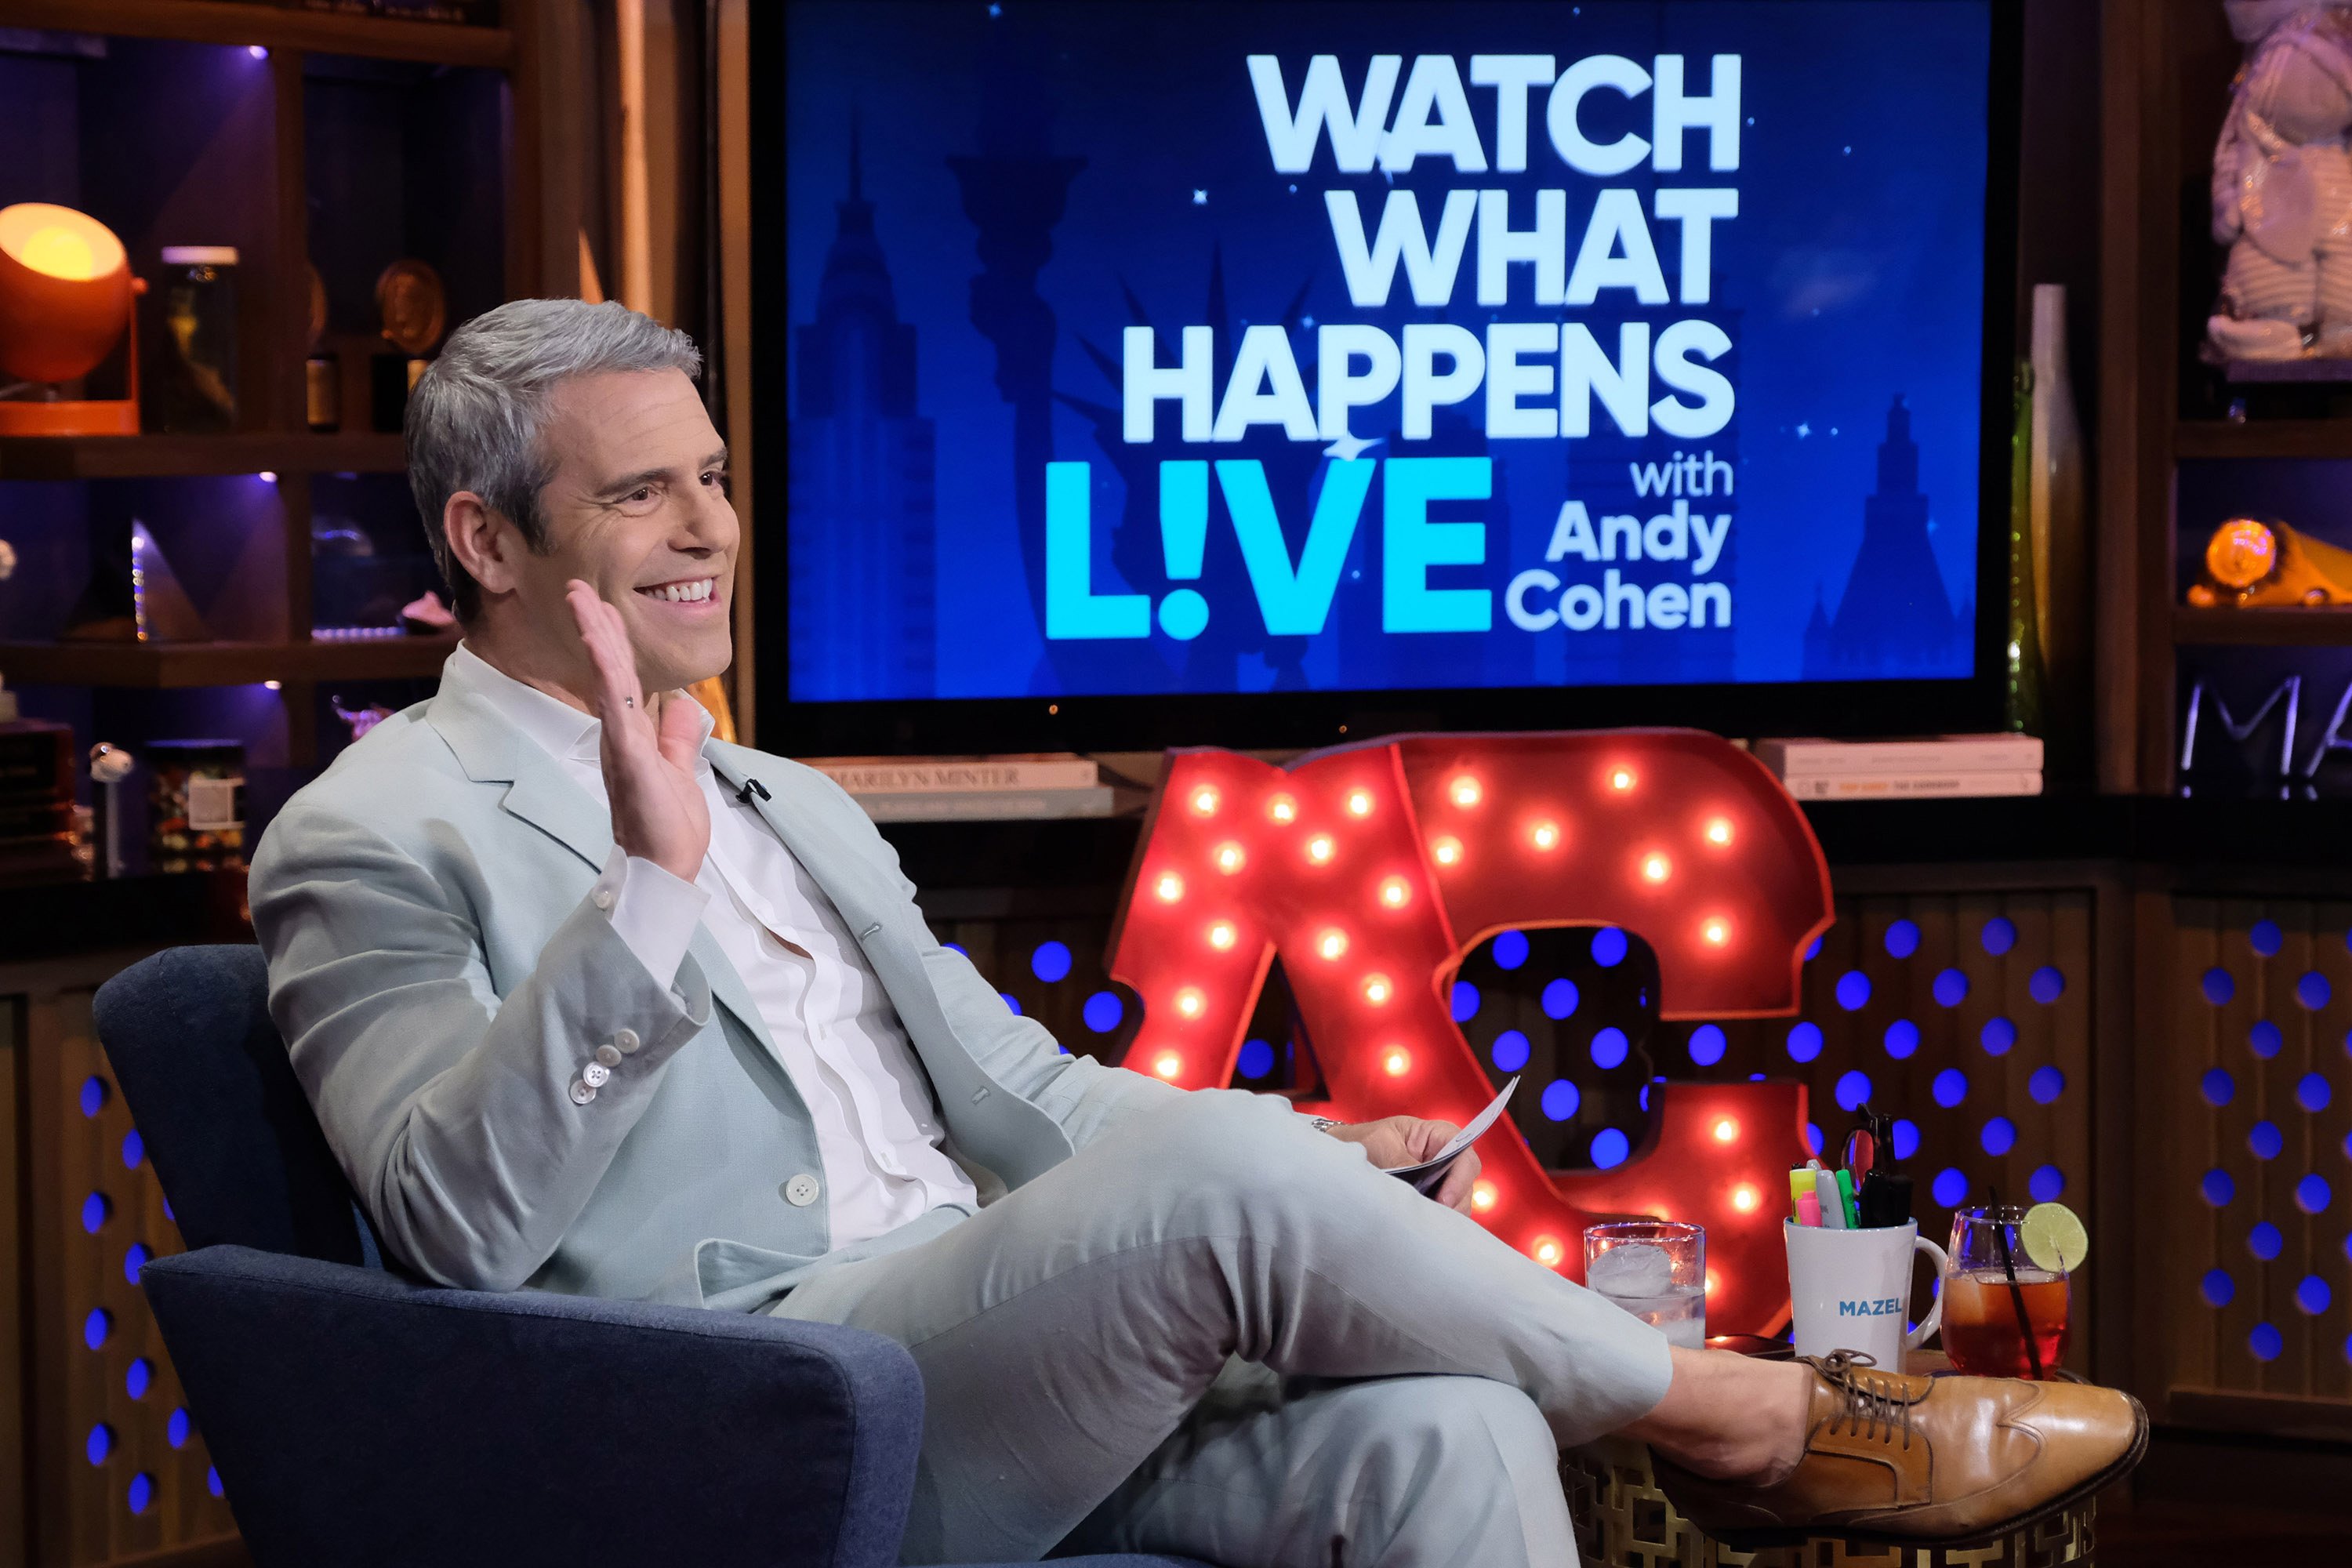 Andy Cohen on the set of 'Watch What Happens Live'